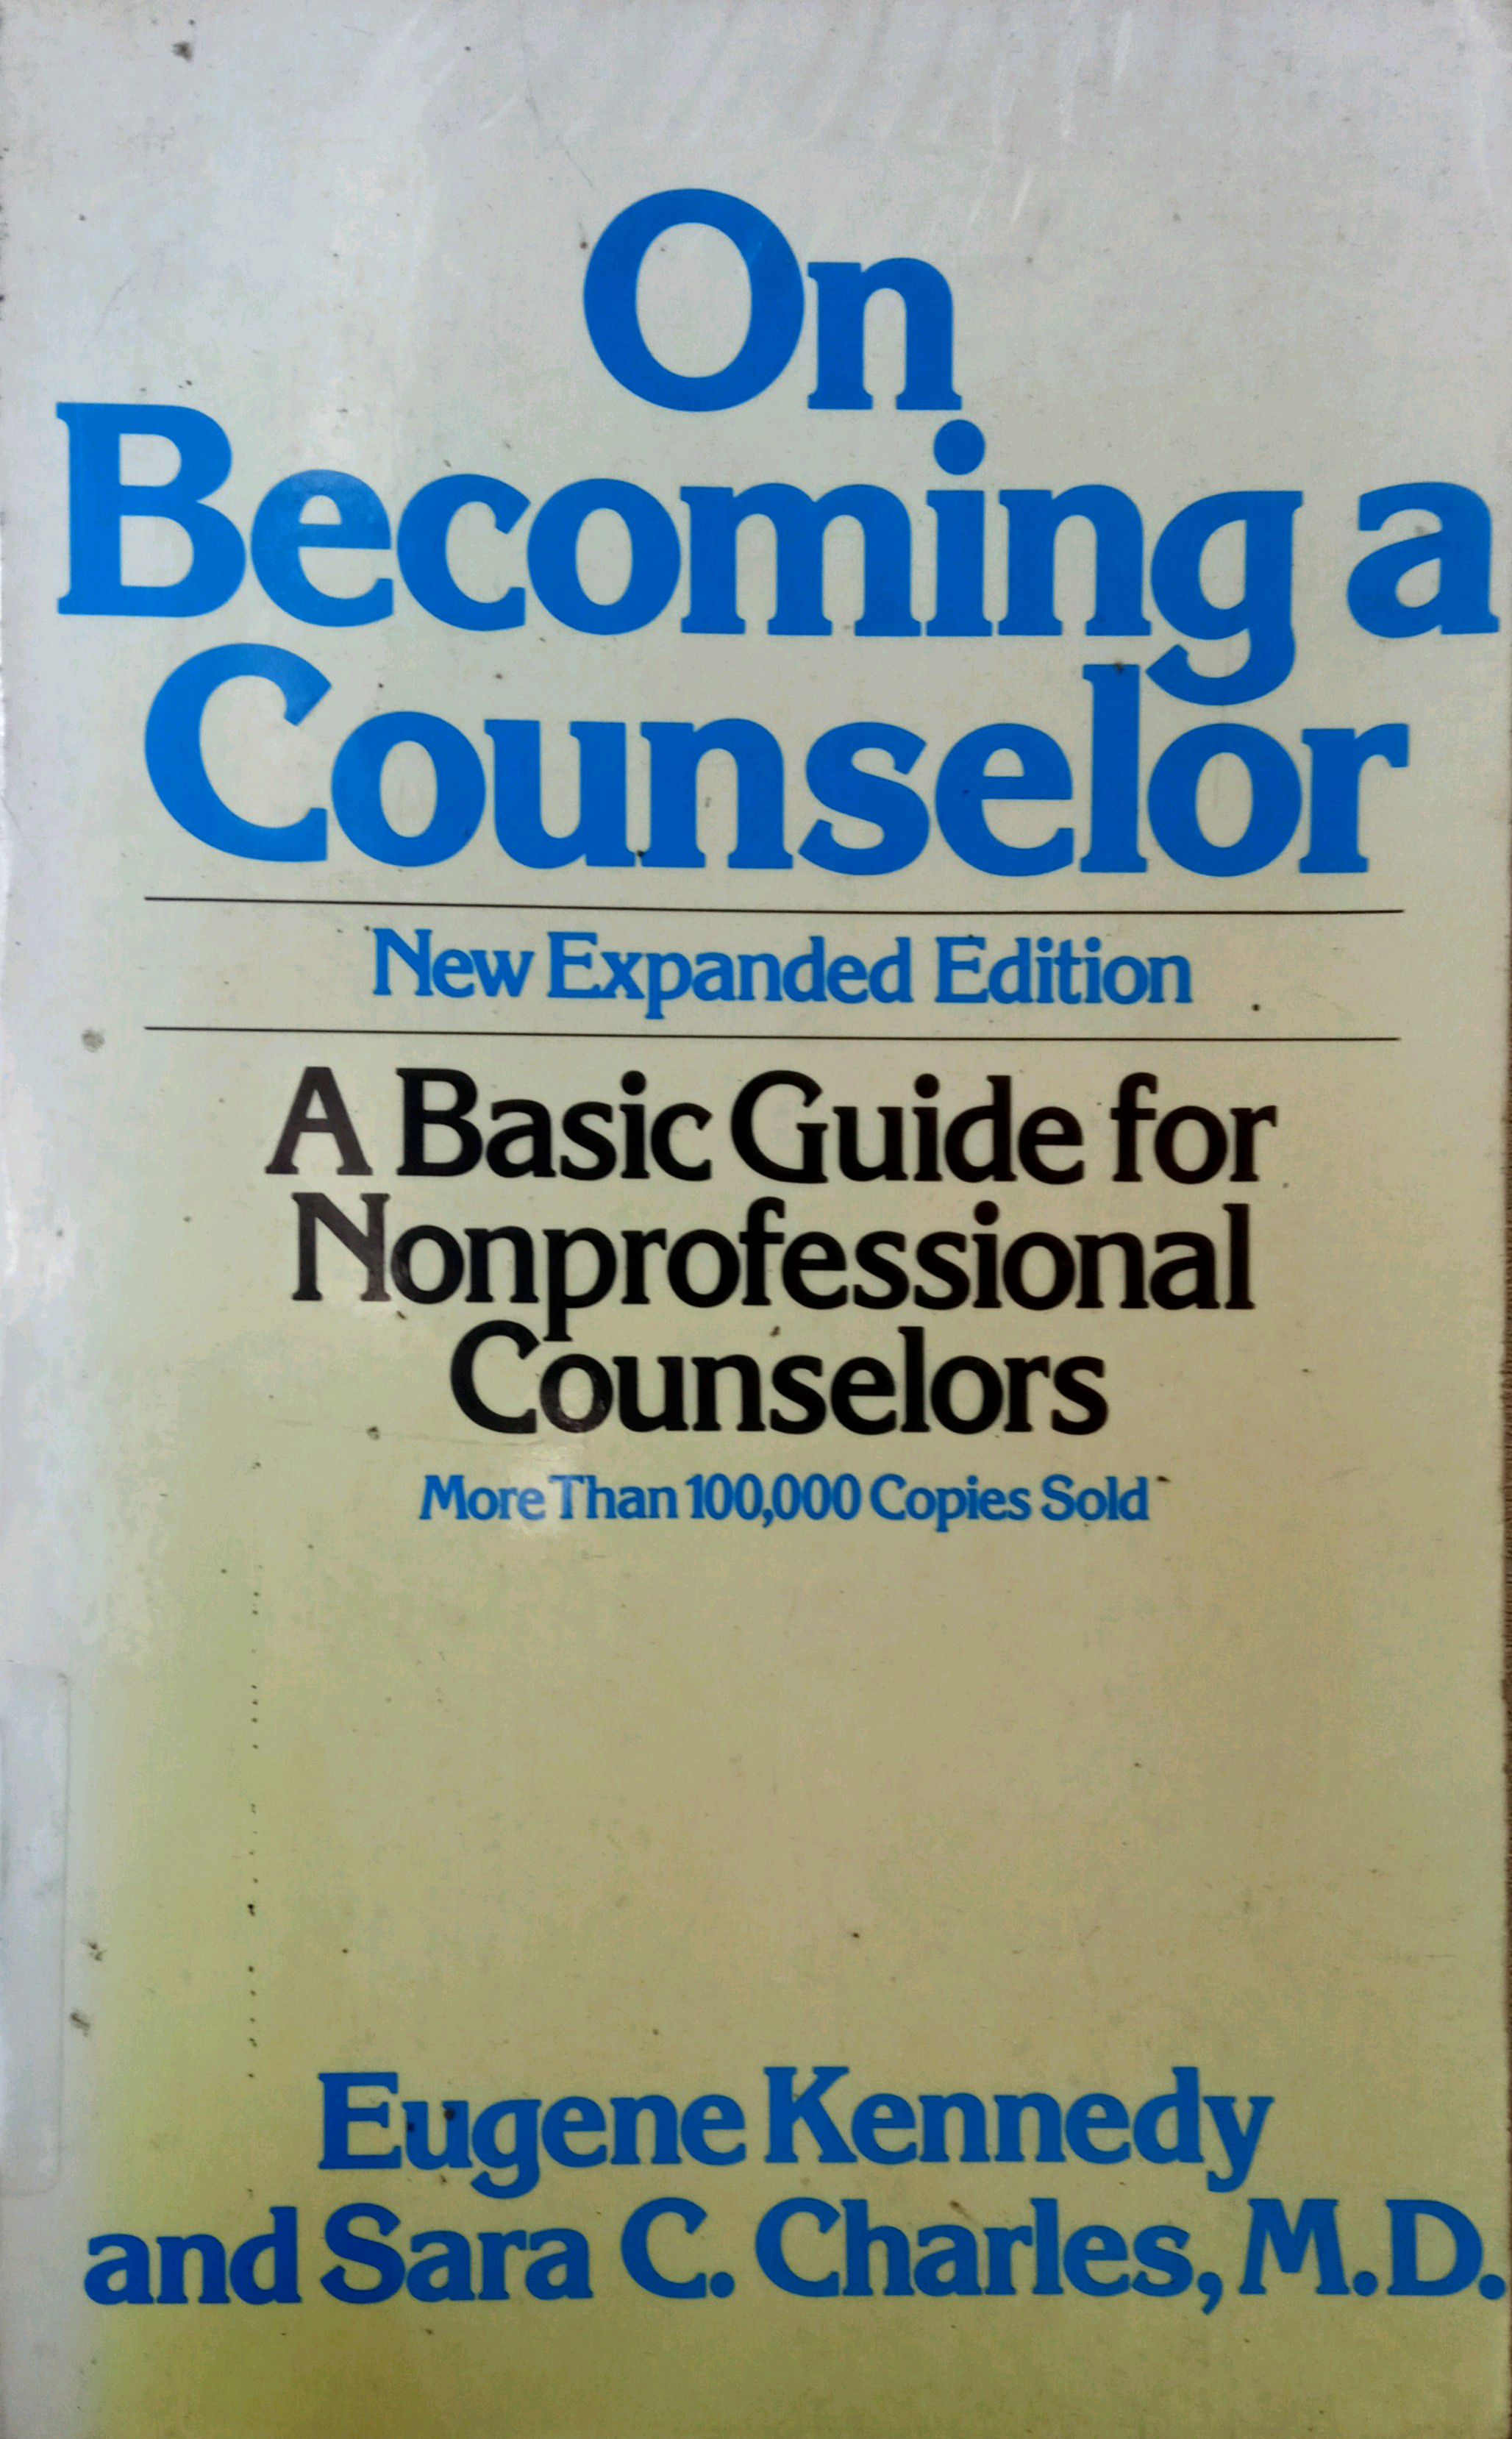 ON BECOMING A COUNSELLOR